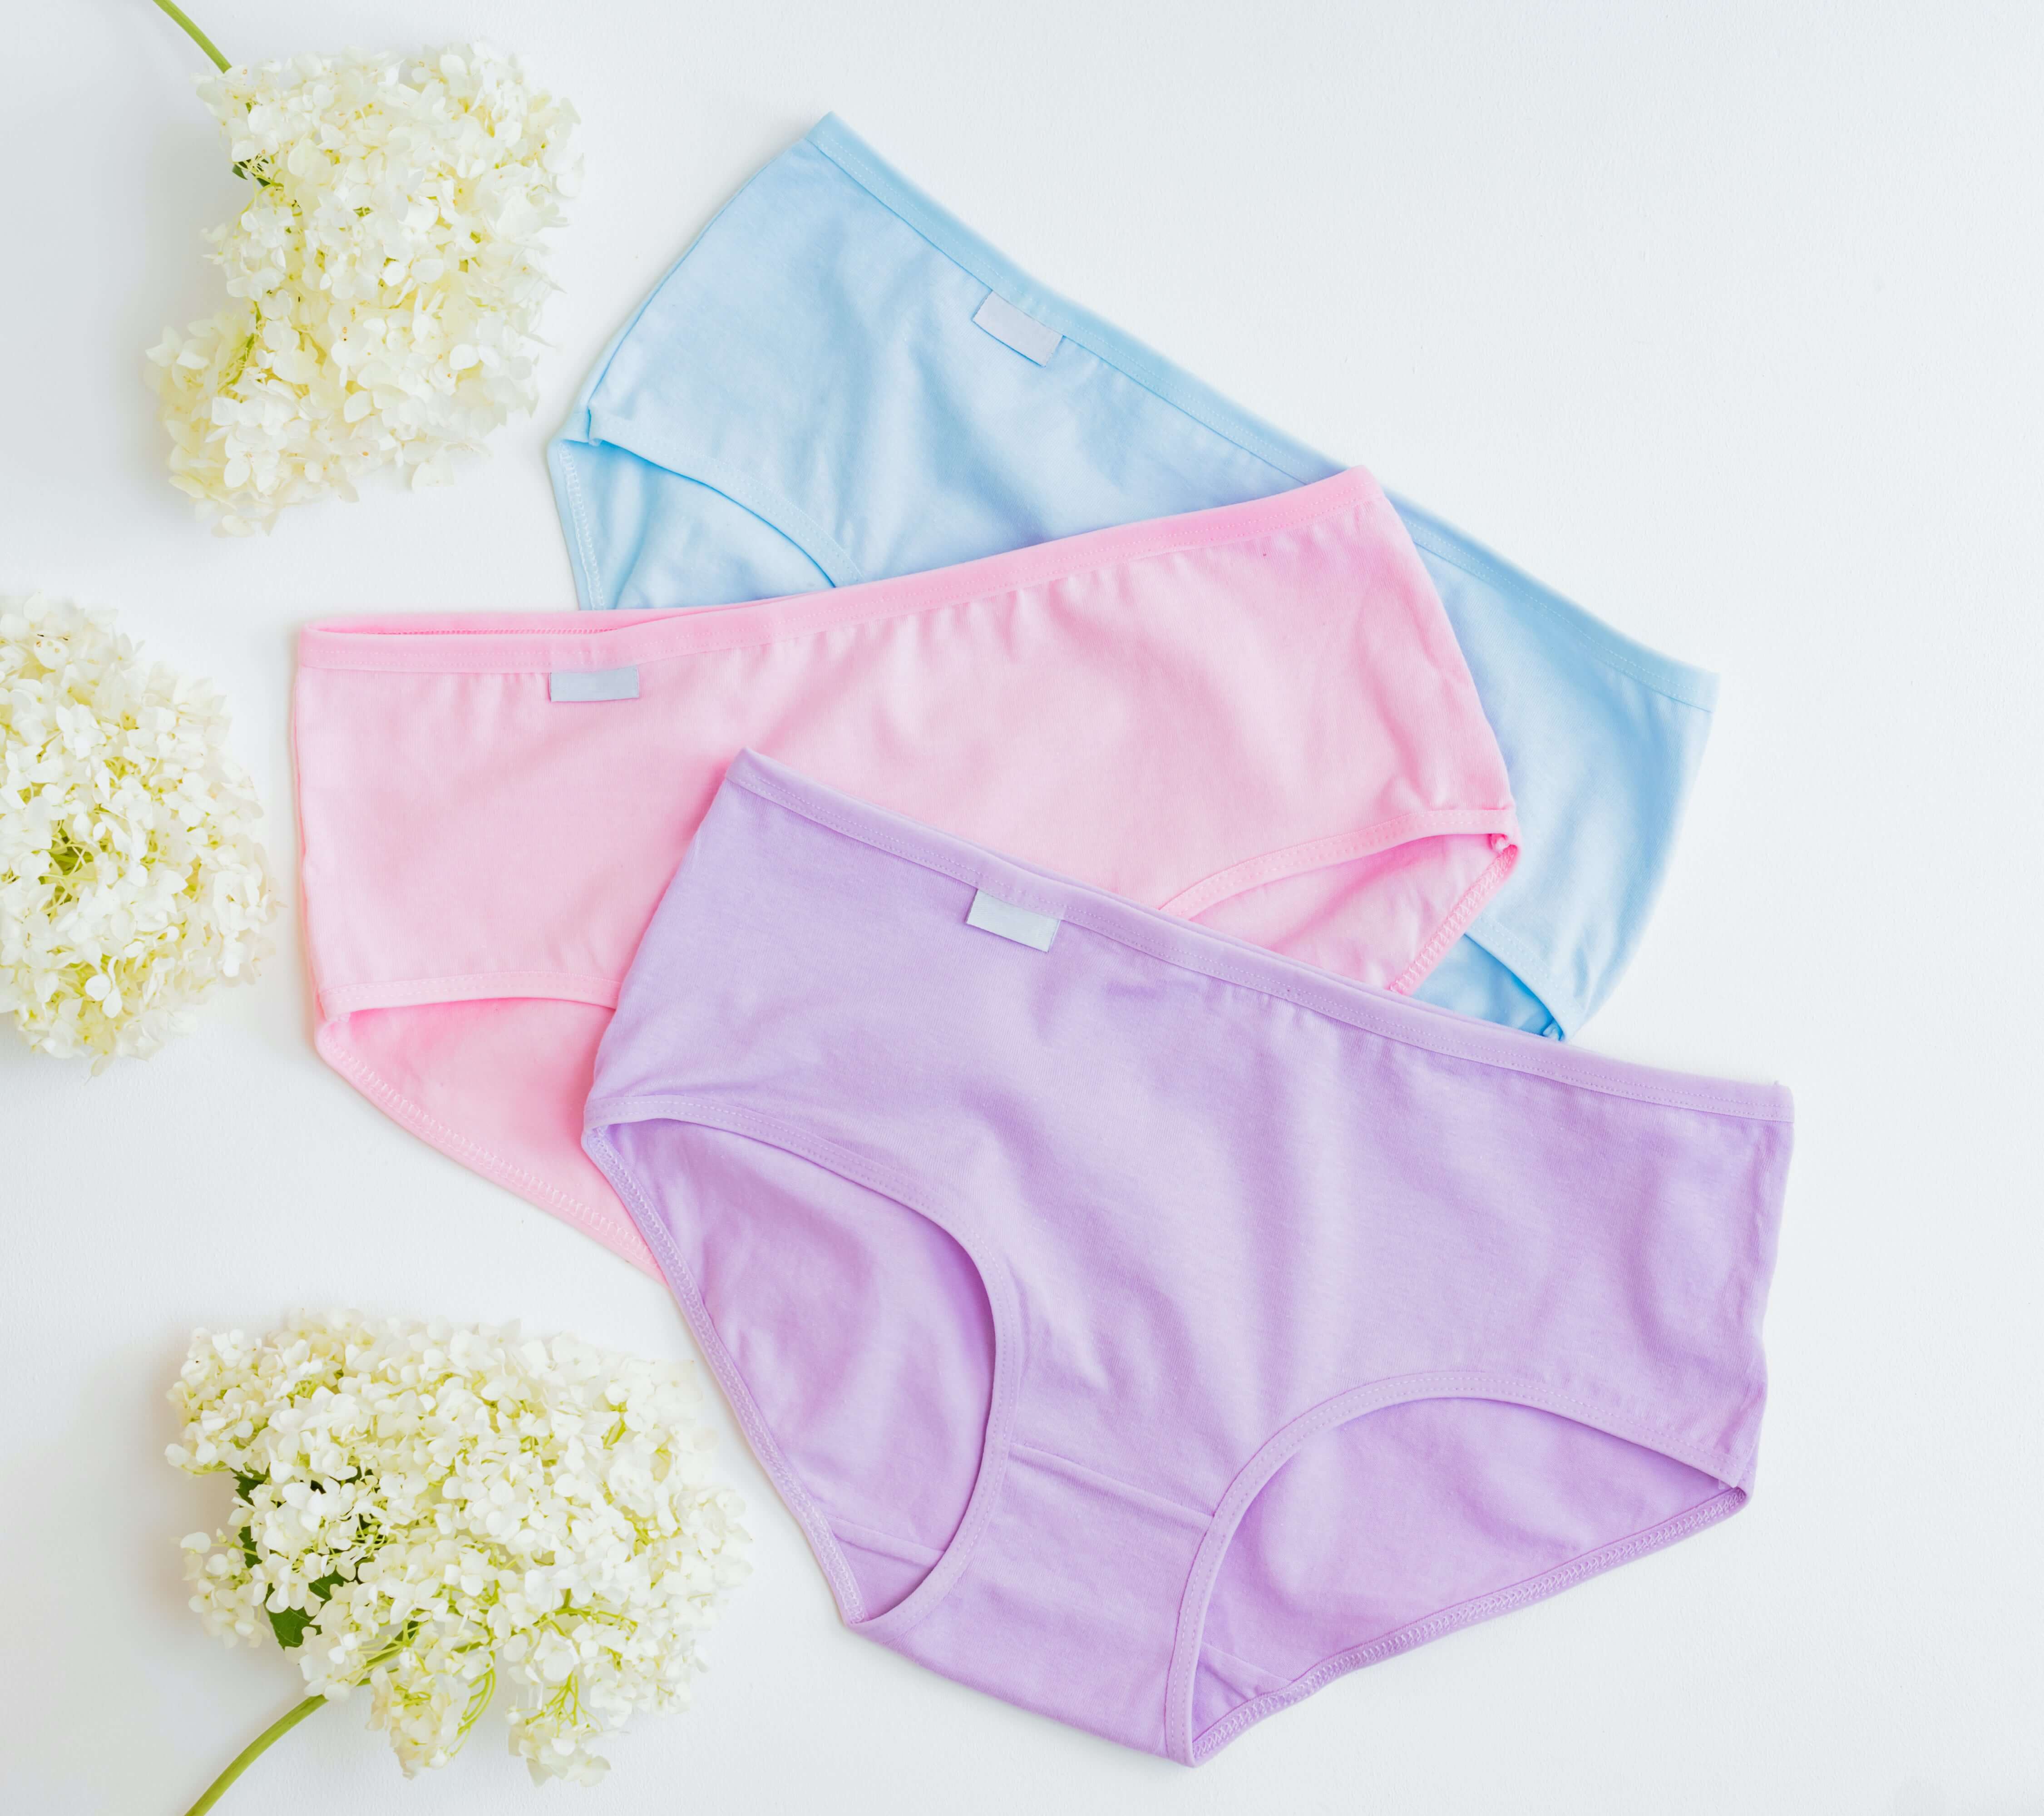 5 Smart Fashion Tips To Buy Panties Online Every Woman Should Know